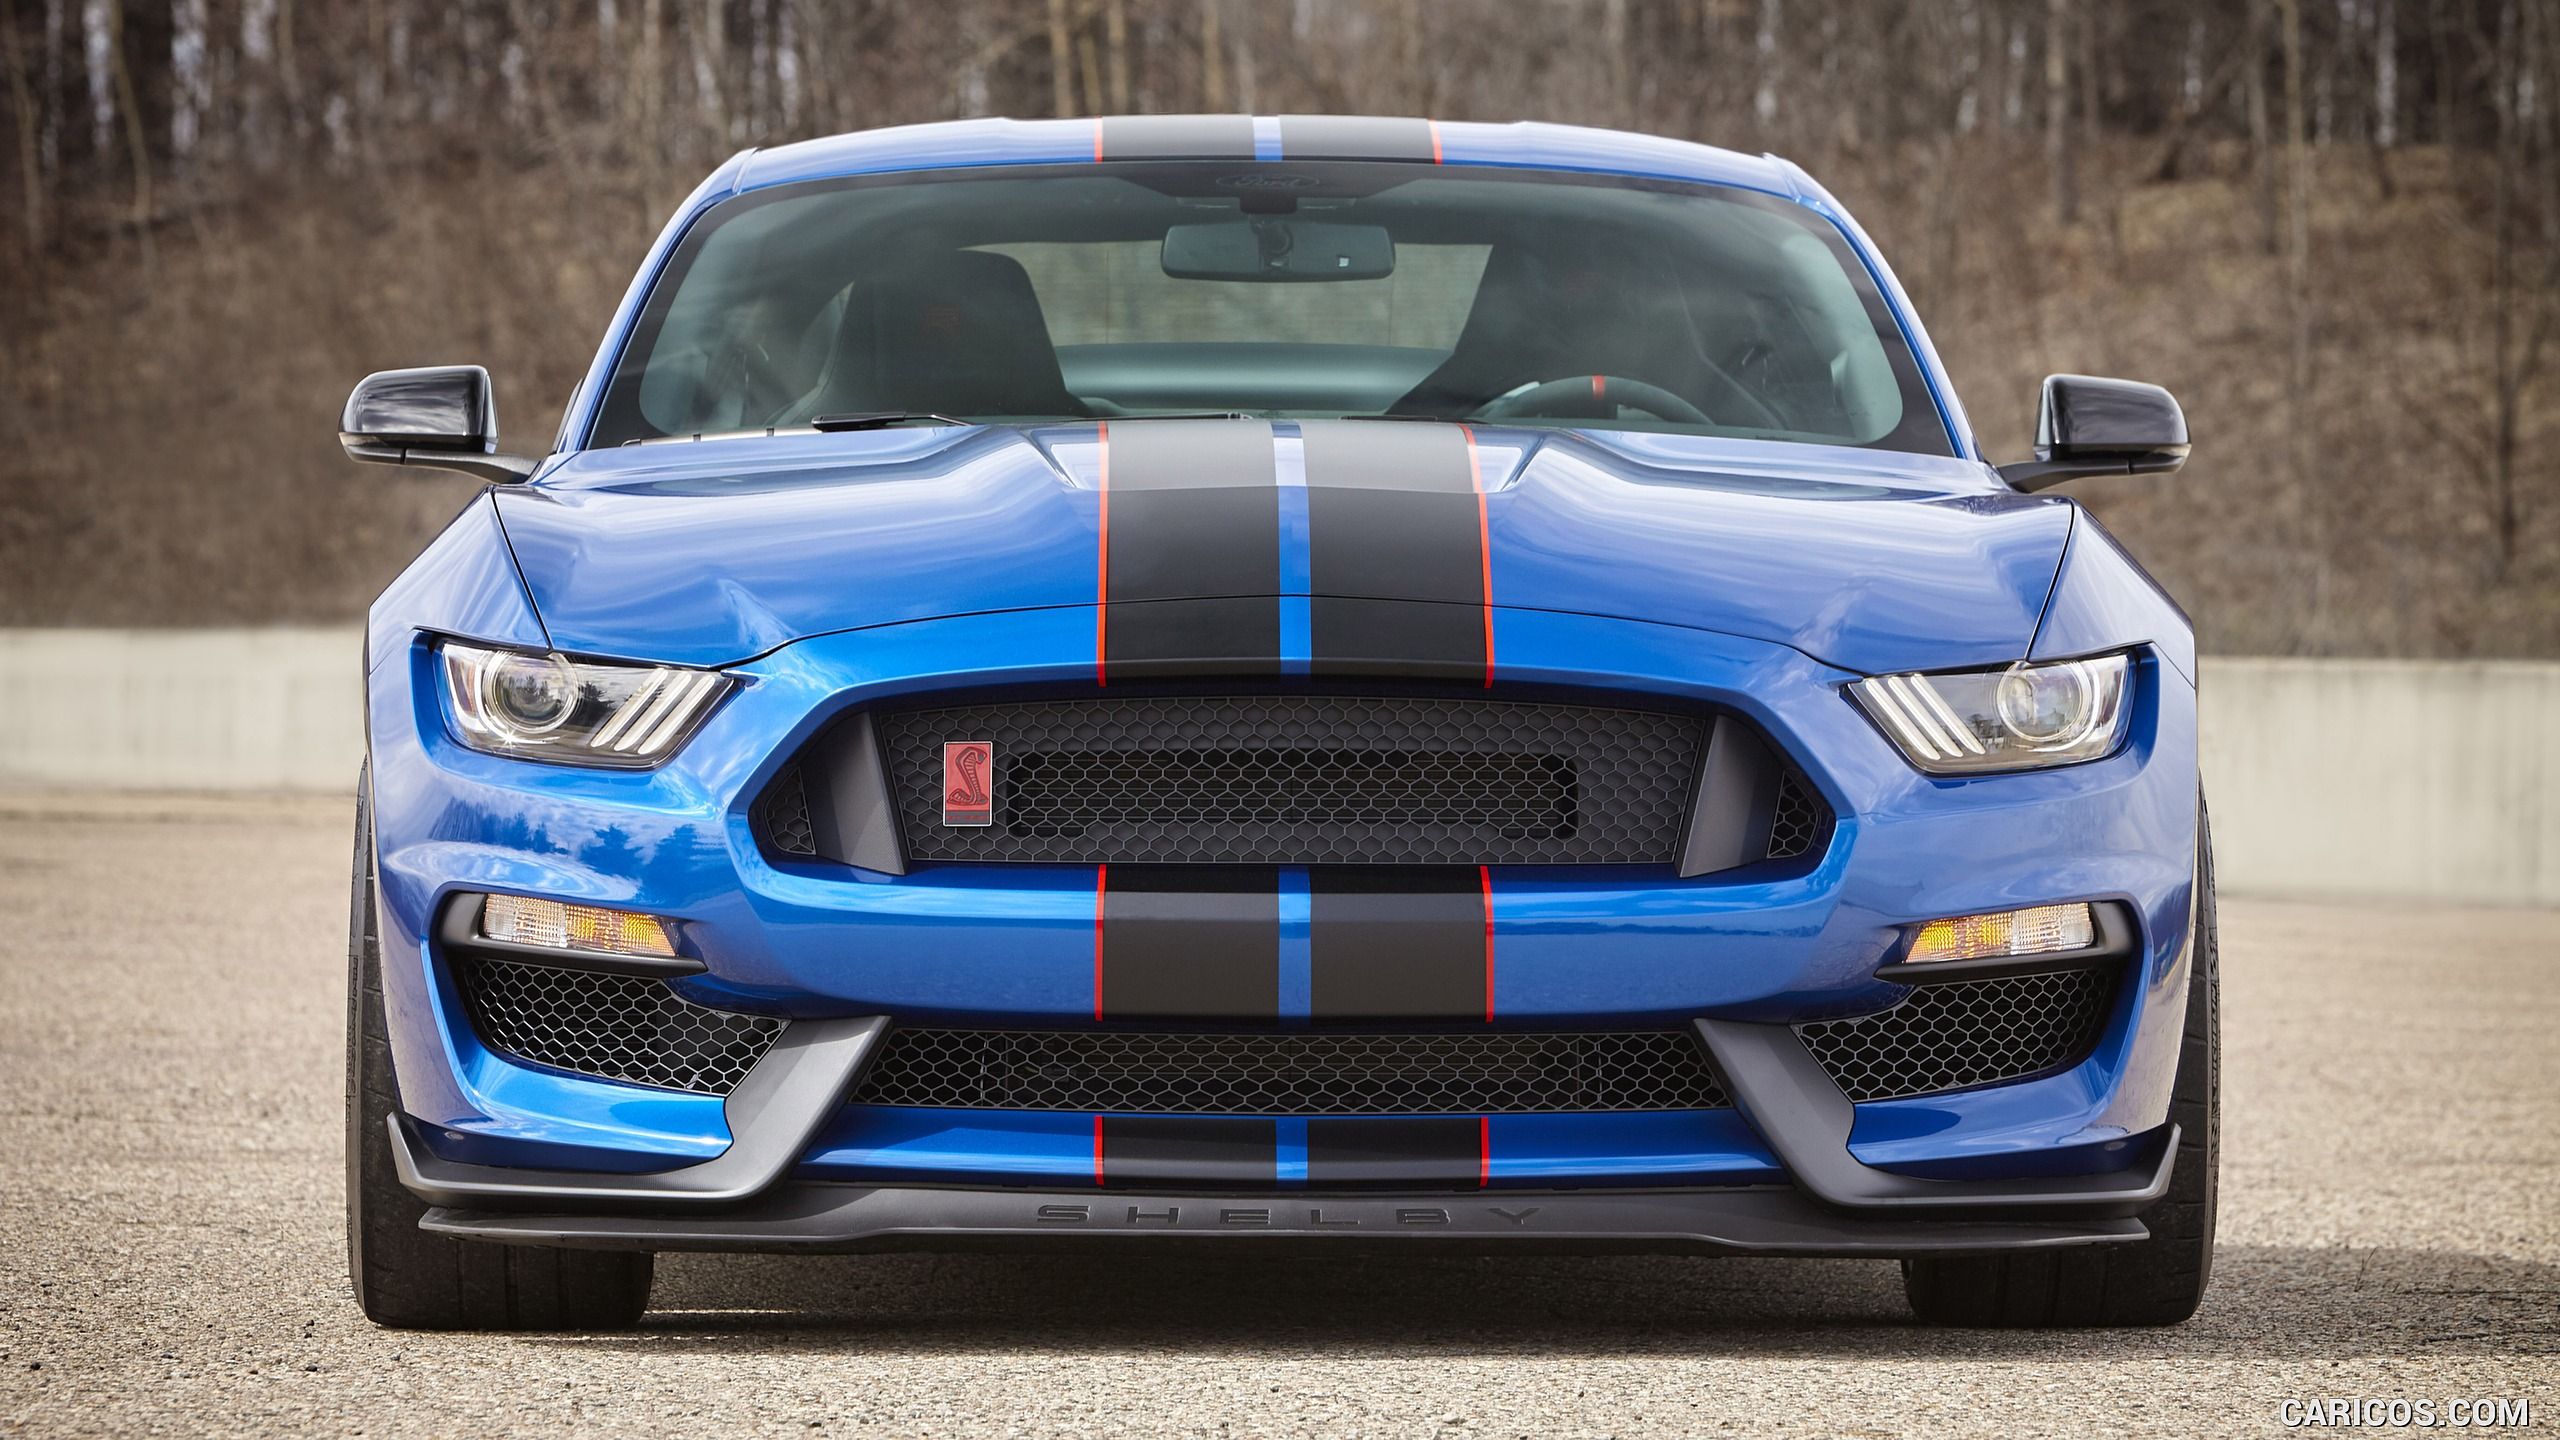 Ford Mustang Shelby Gt350 And Gt350r Wallpaper Things To